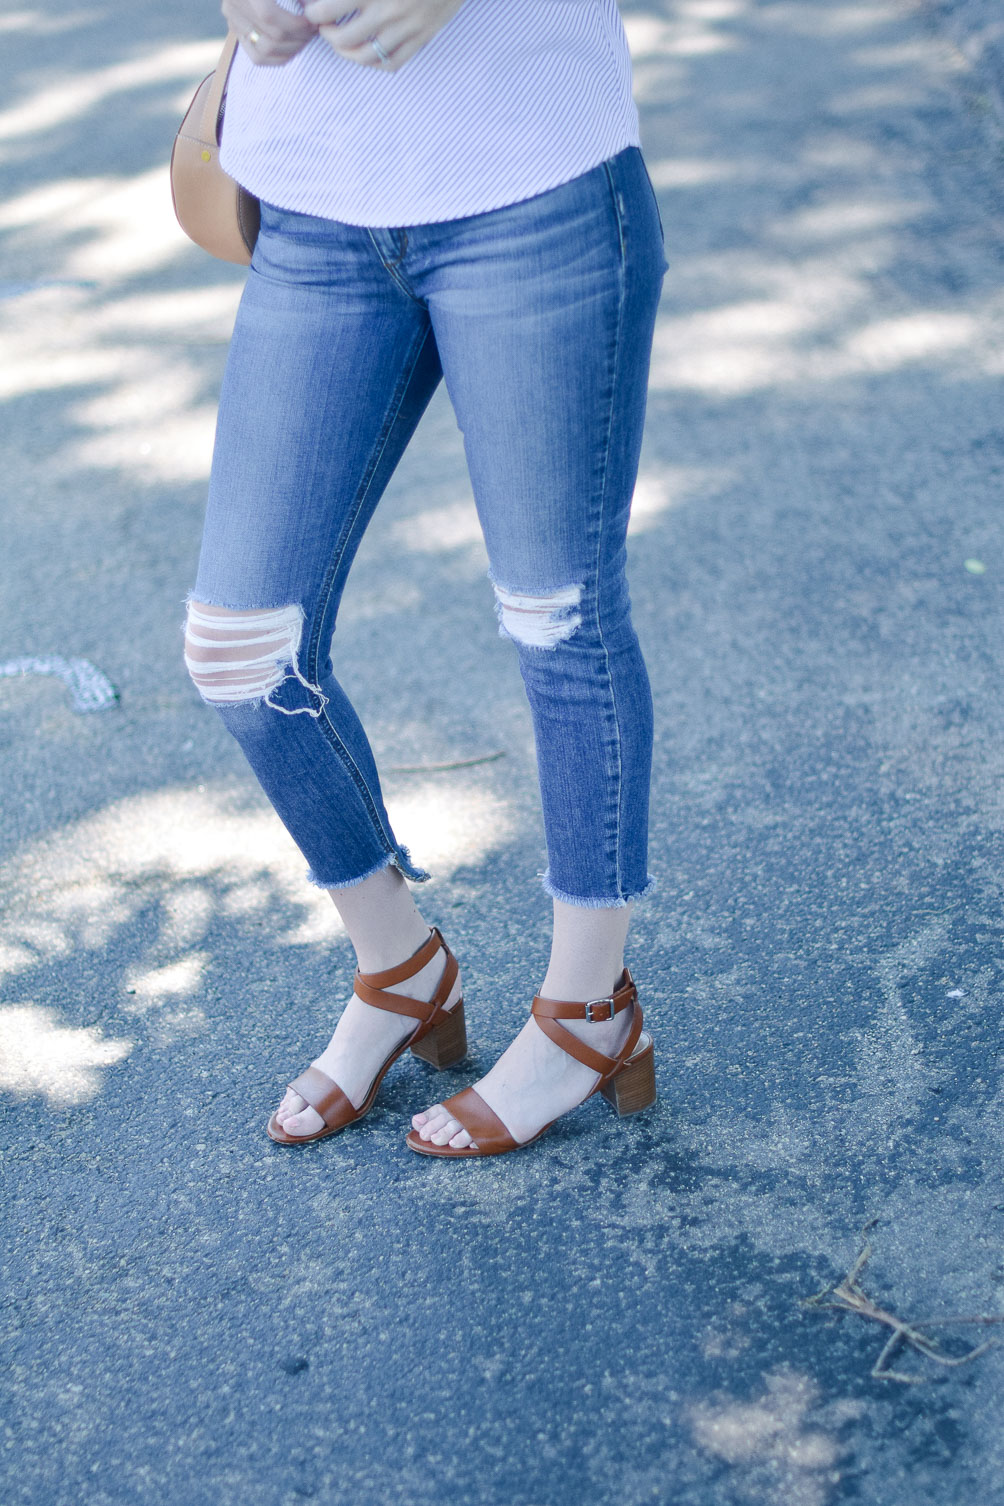 styling a summer outfit with this ruffle one shoulder top and distressed skinny jeans